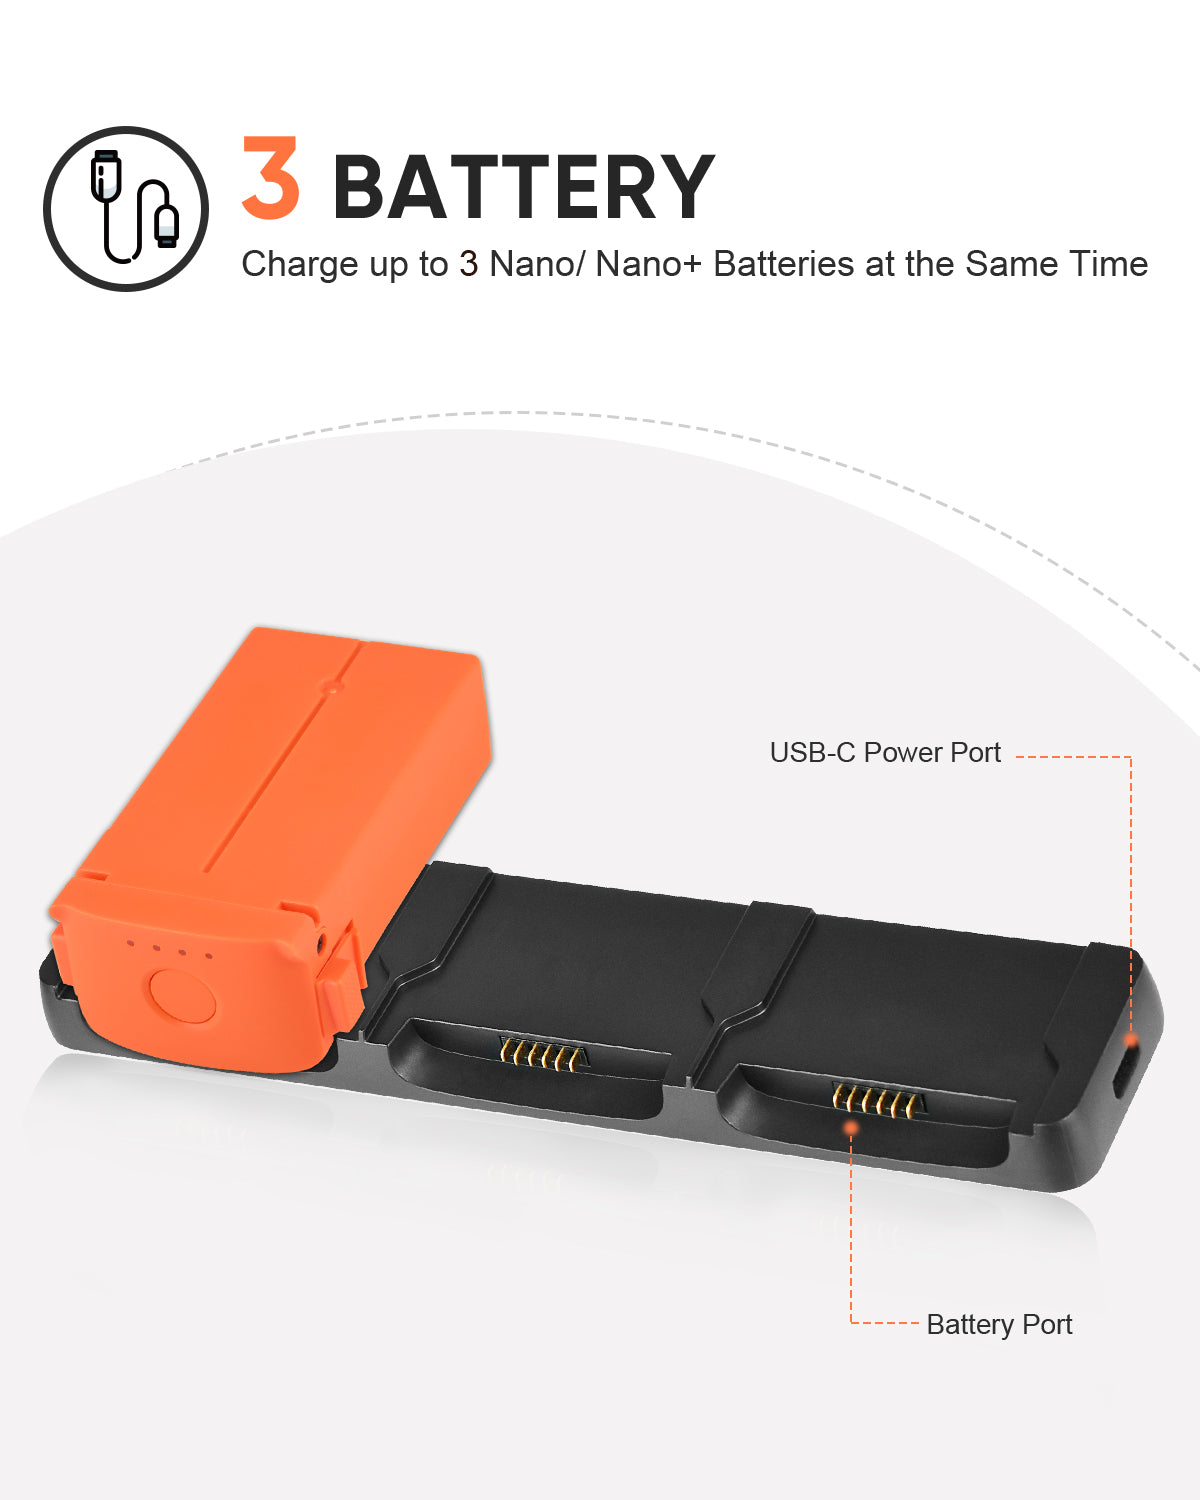 Autel Robotics EVO Nano Multi-Charger 3 Batteries Charging Hub can charge up to three Nano batteries at the same time